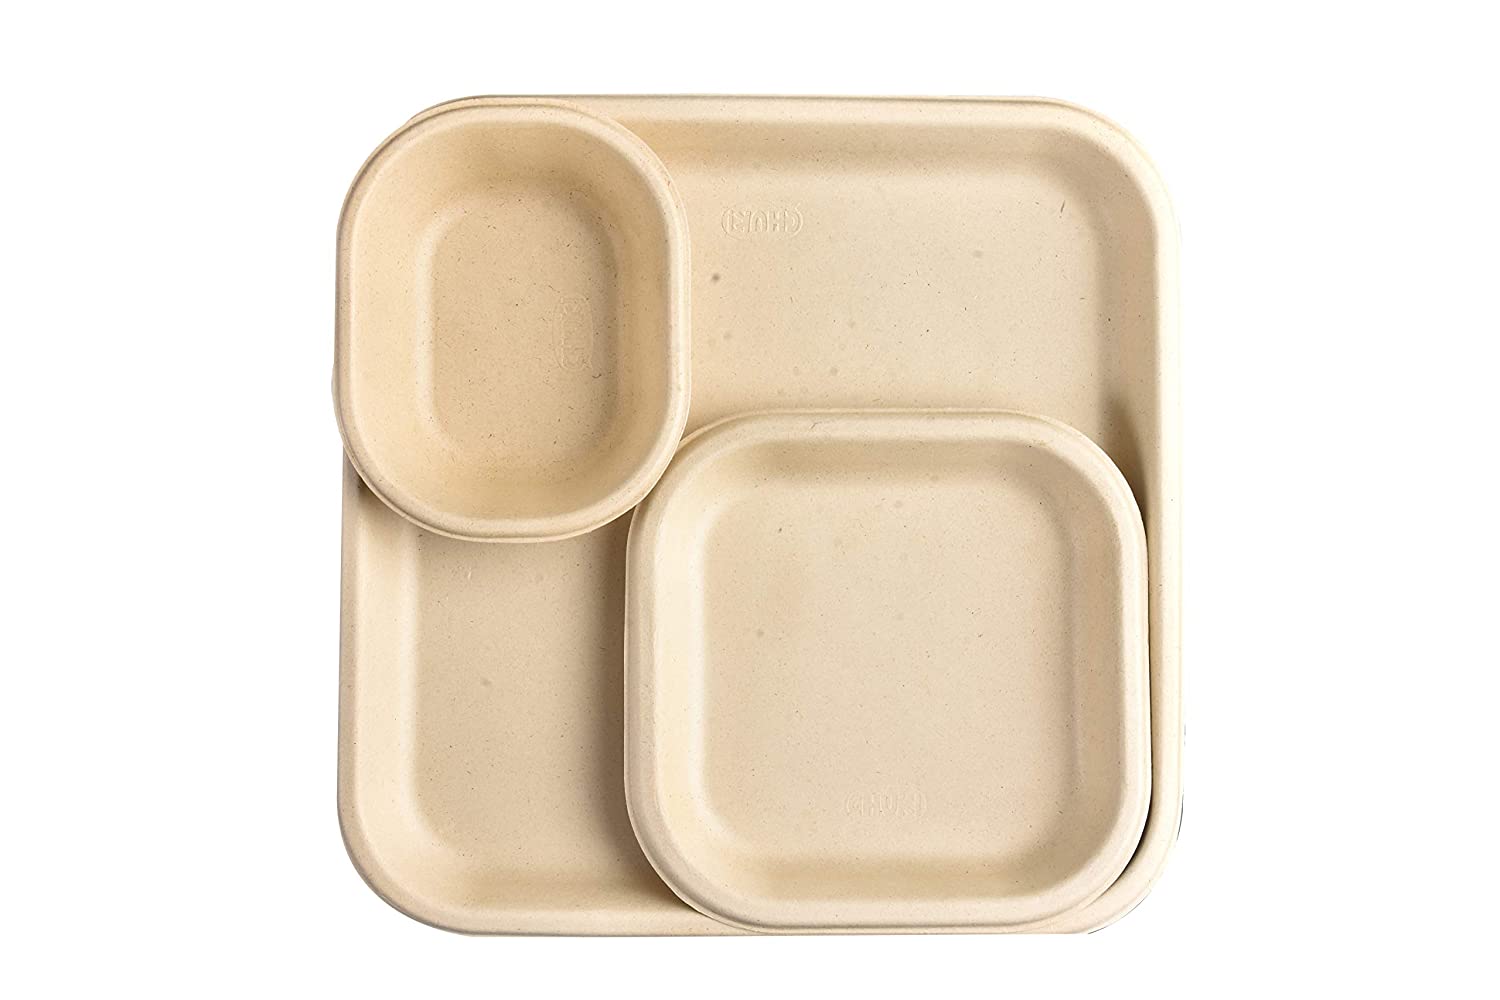 https://www.rudraeco.com/wp-content/uploads/2022/02/Chuk-BioDegradable-Disposable-and-Eco-Friendly-Dinner-Plate-11-Inch-Set-of-25-4.jpg